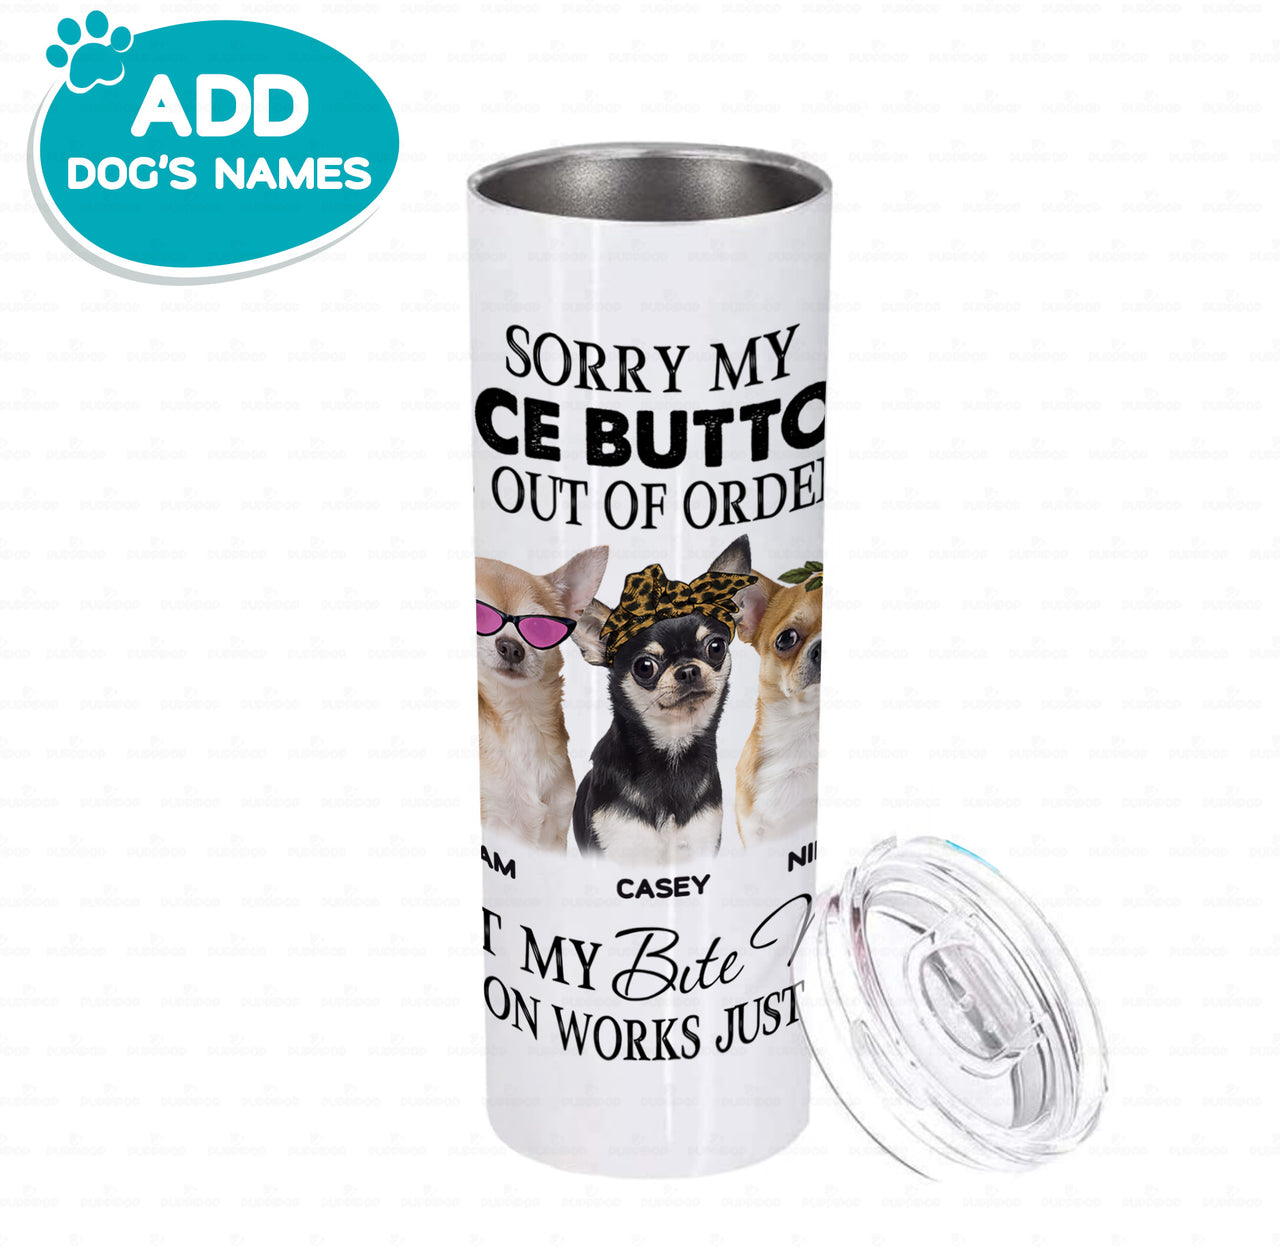 Personalized Dog Gift Idea - Nice Button Fails Bite Button Works For Dog Lover - Tumbler